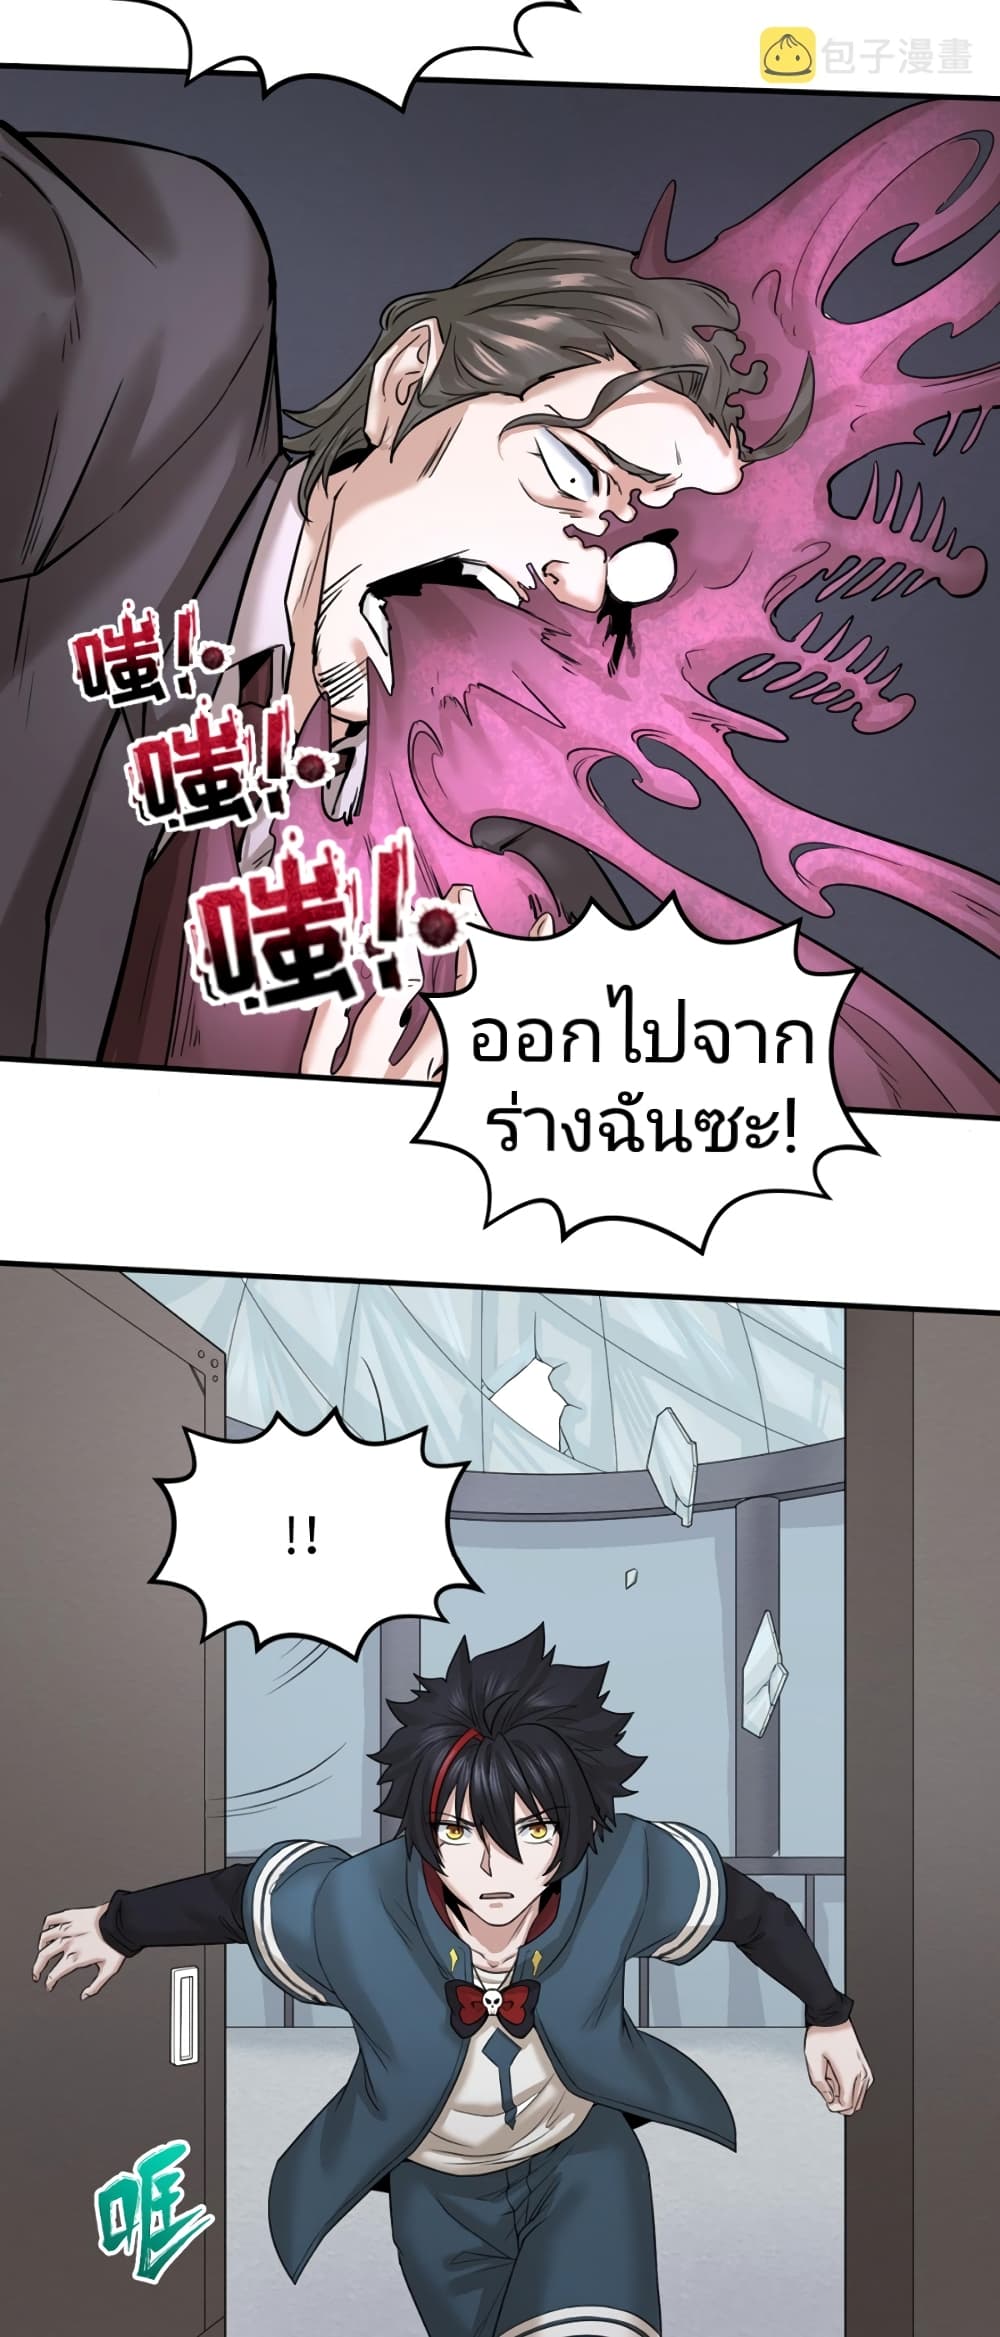 The Age of Ghost Spirits à¸à¸­à¸à¸à¸µà¹ 34 (9)